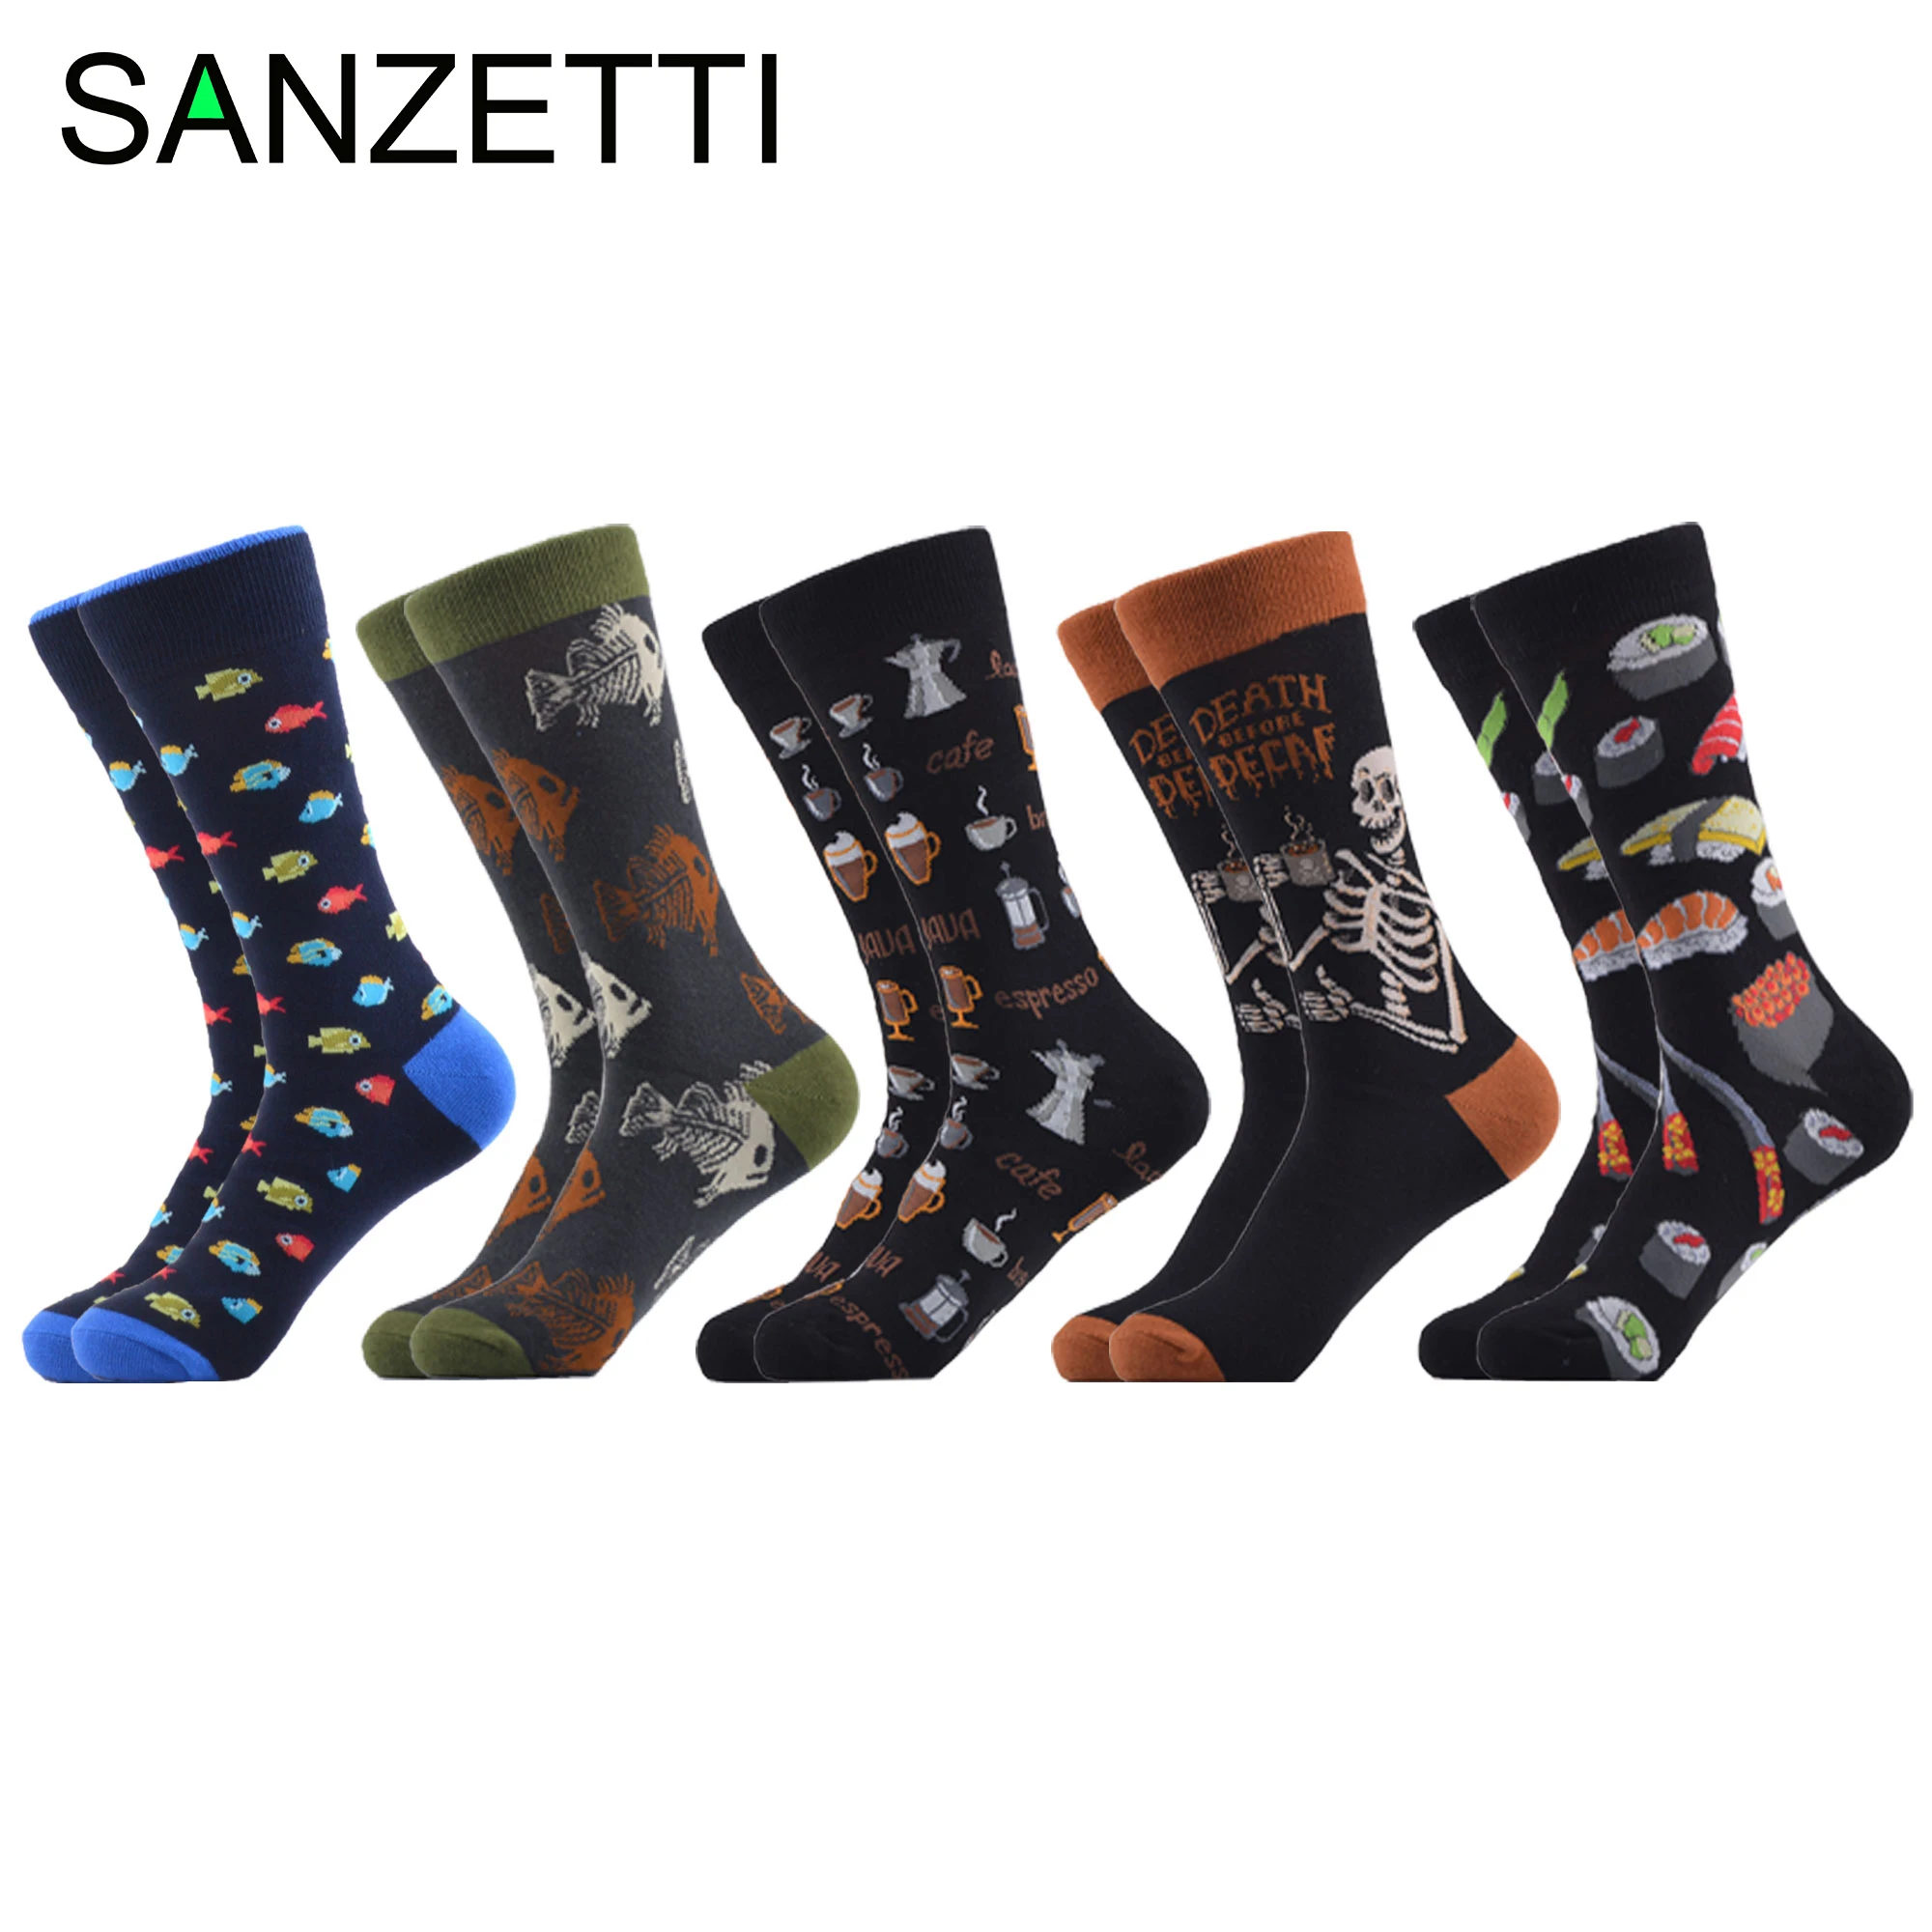 SANZETTI 5 Pairs/Lot New Style Men's Casual Combed Cotton Happy Crew Socks Fish Coffee Pattern Party Gifts Creative Dress Socks